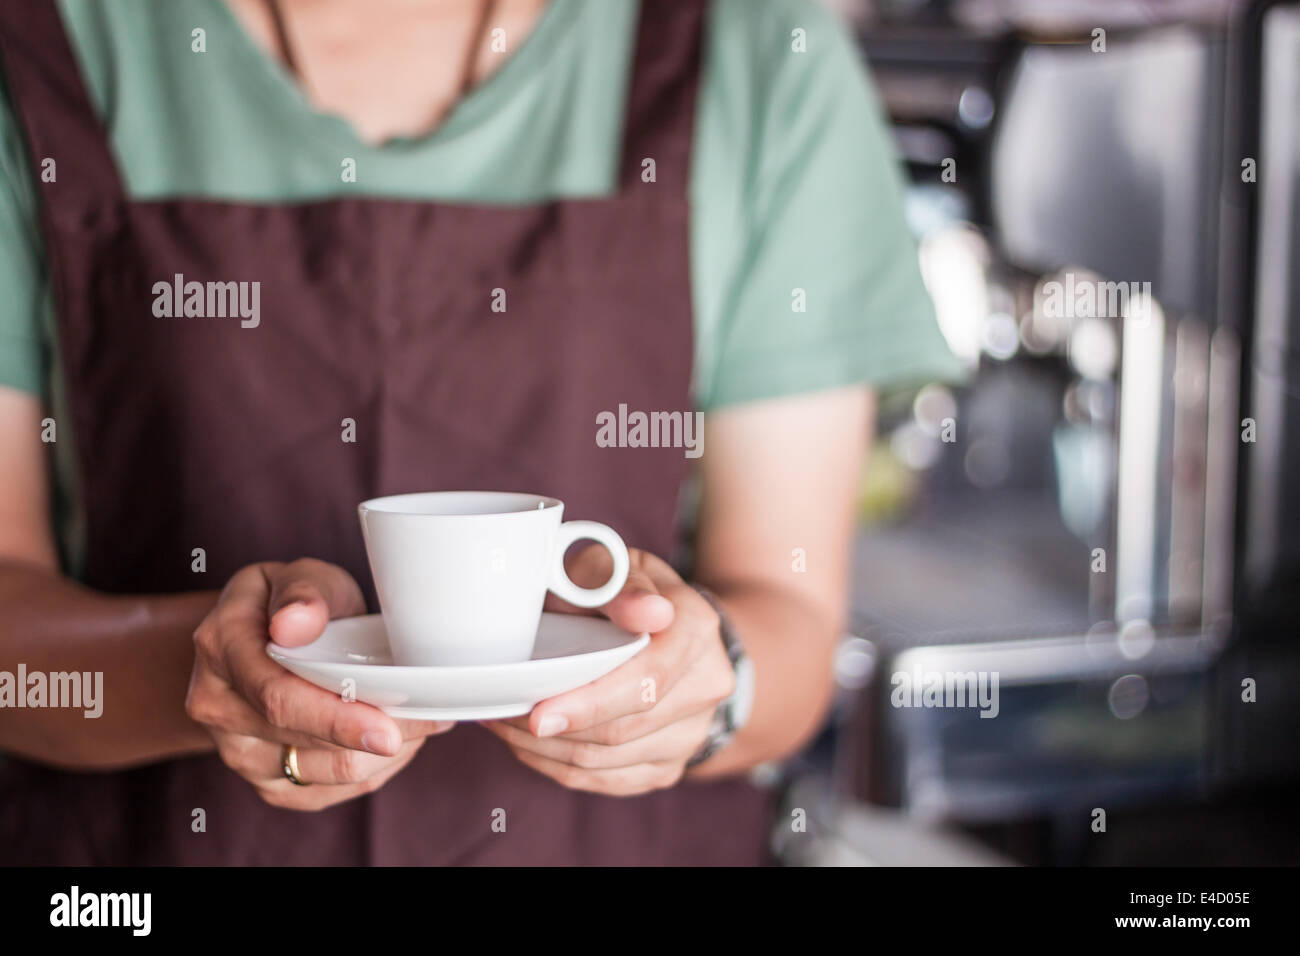 Asian barista serving freshly brewed coffee, stock photo Stock Photo